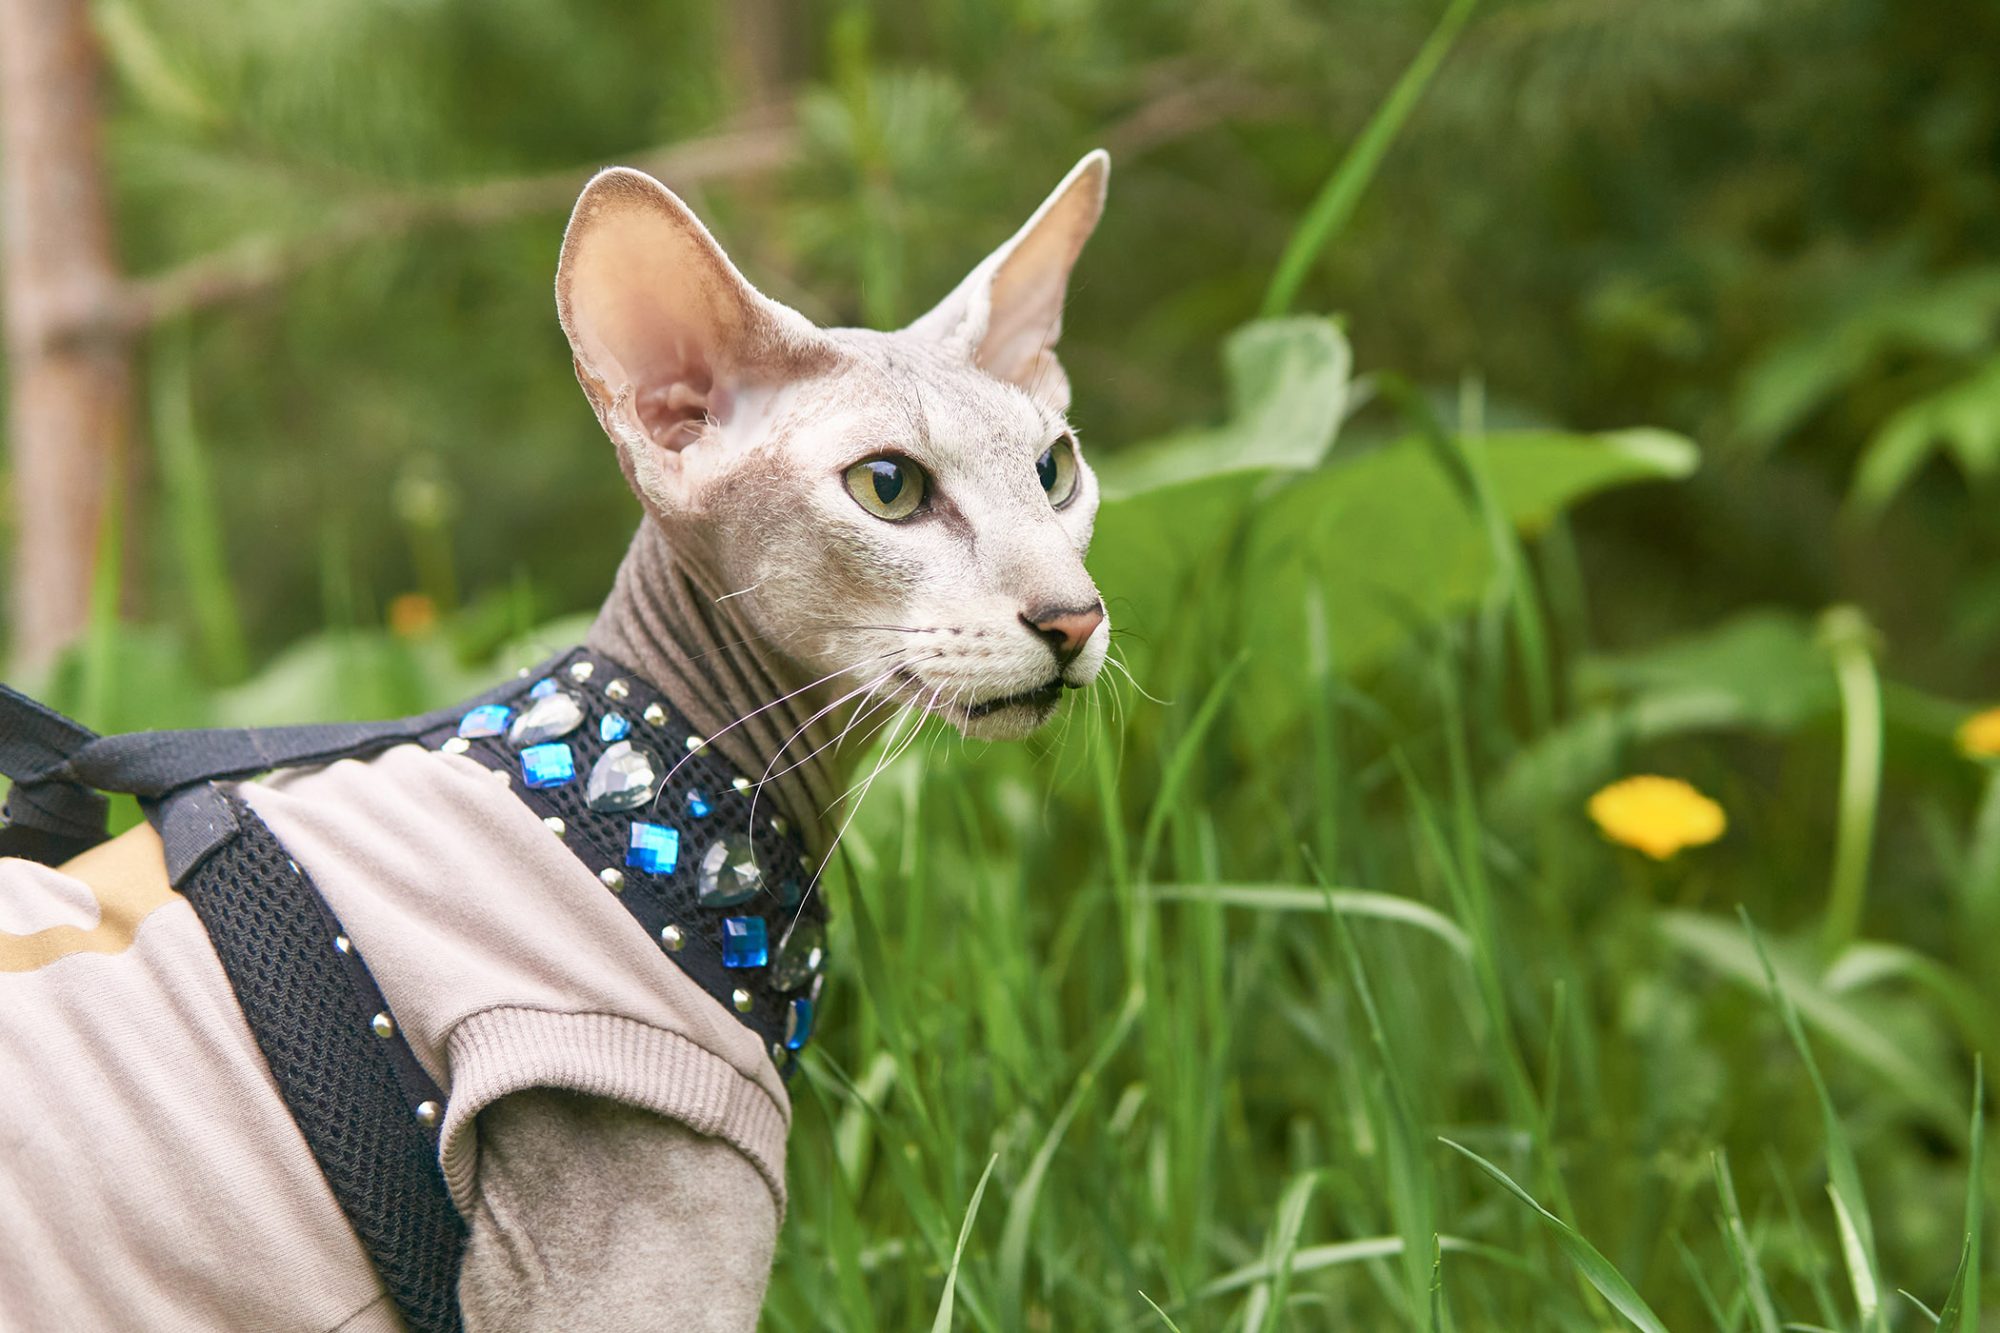 Are Peterbald cats friendly?